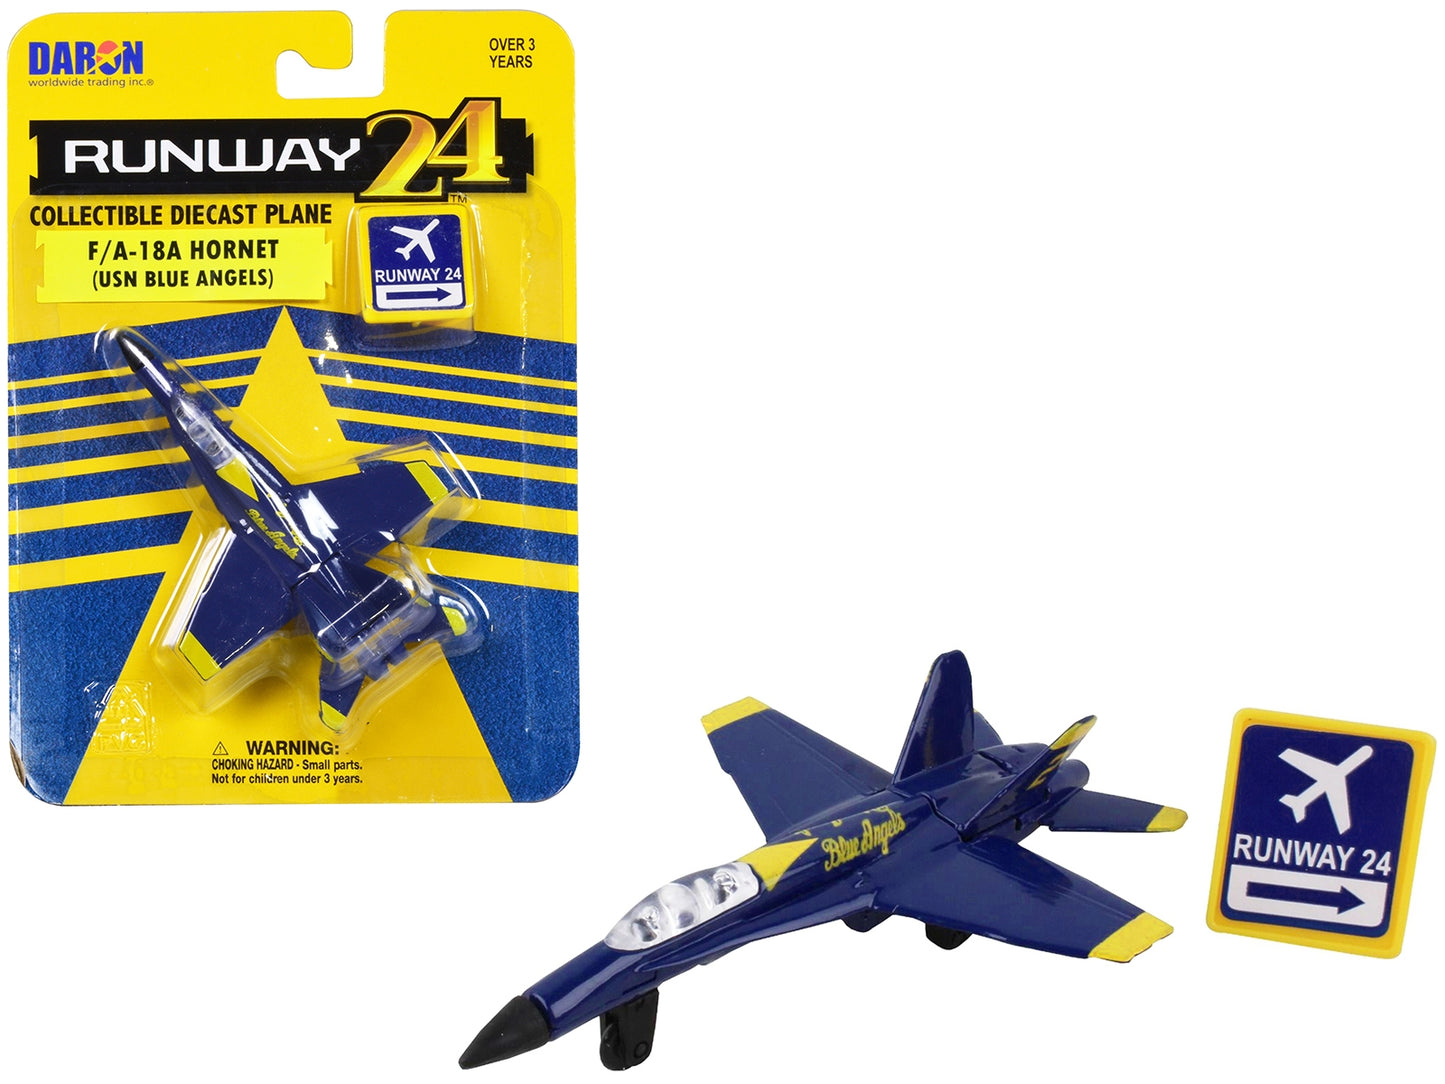 McDonnell Douglas F/A-18A Hornet Fighter Aircraft Blue "United States Navy Blue Angels #2" with Runway 24 Sign Diecast Model Airplane by Runway24